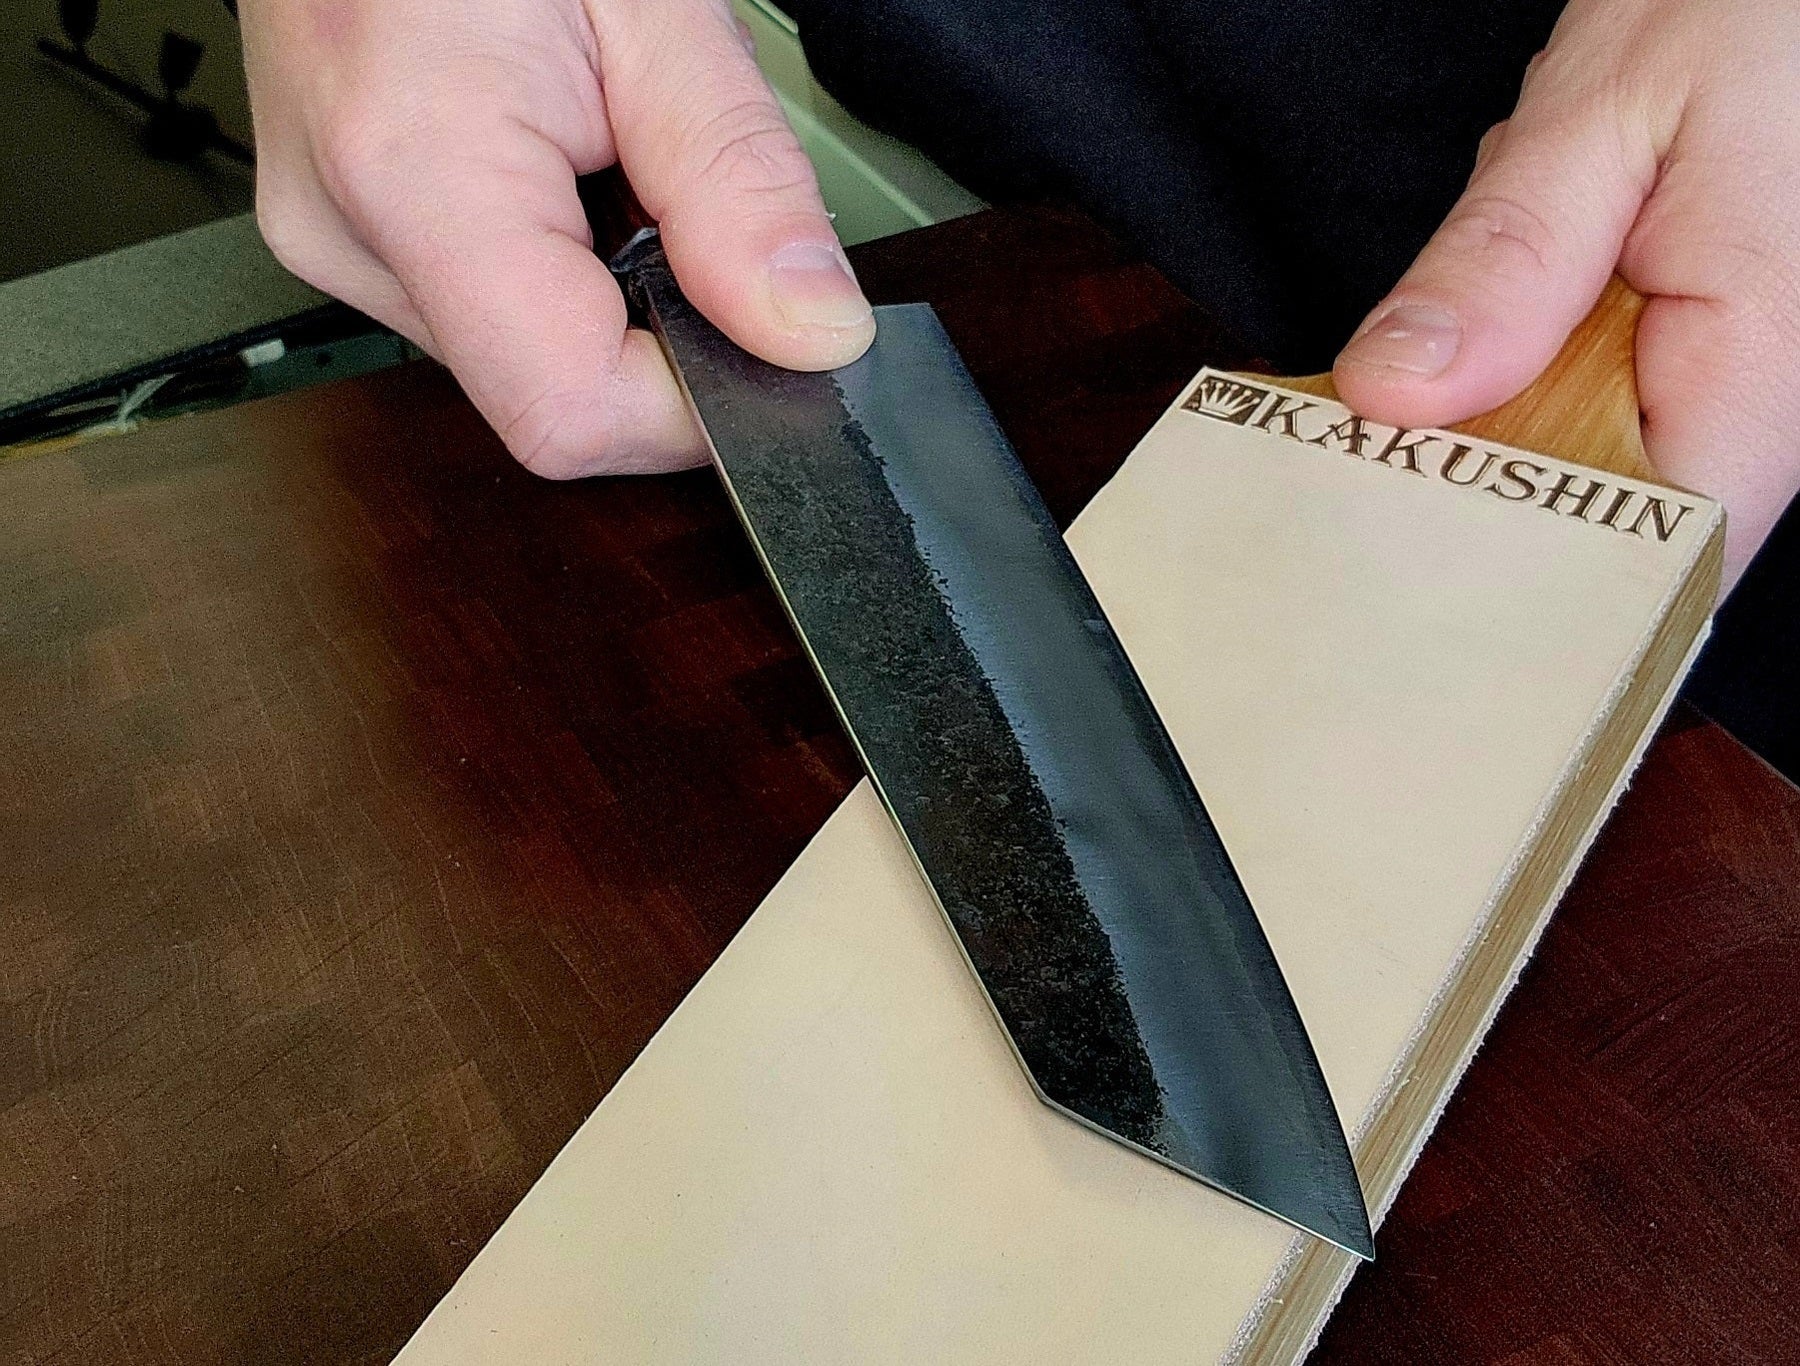 How-to Strop Your Knives: A Short Guide - Kakushin